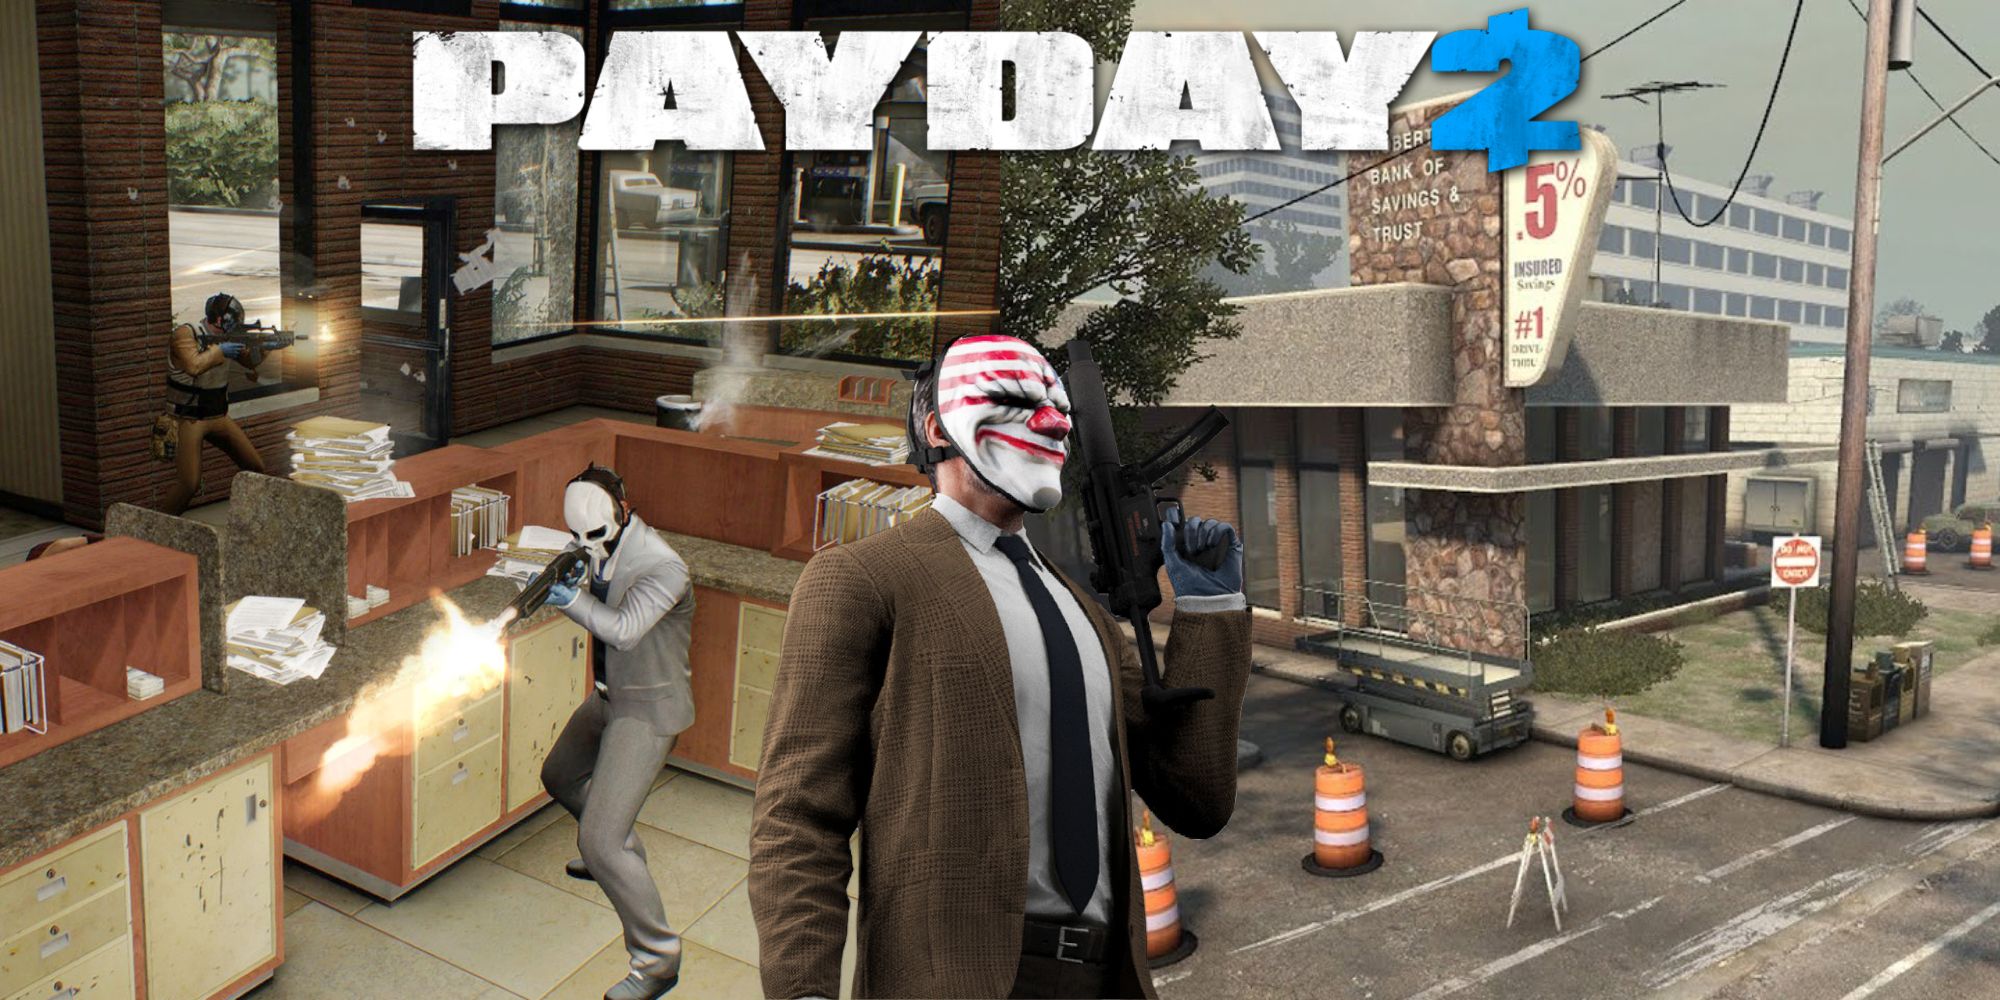 Bank go payday 2 фото 13